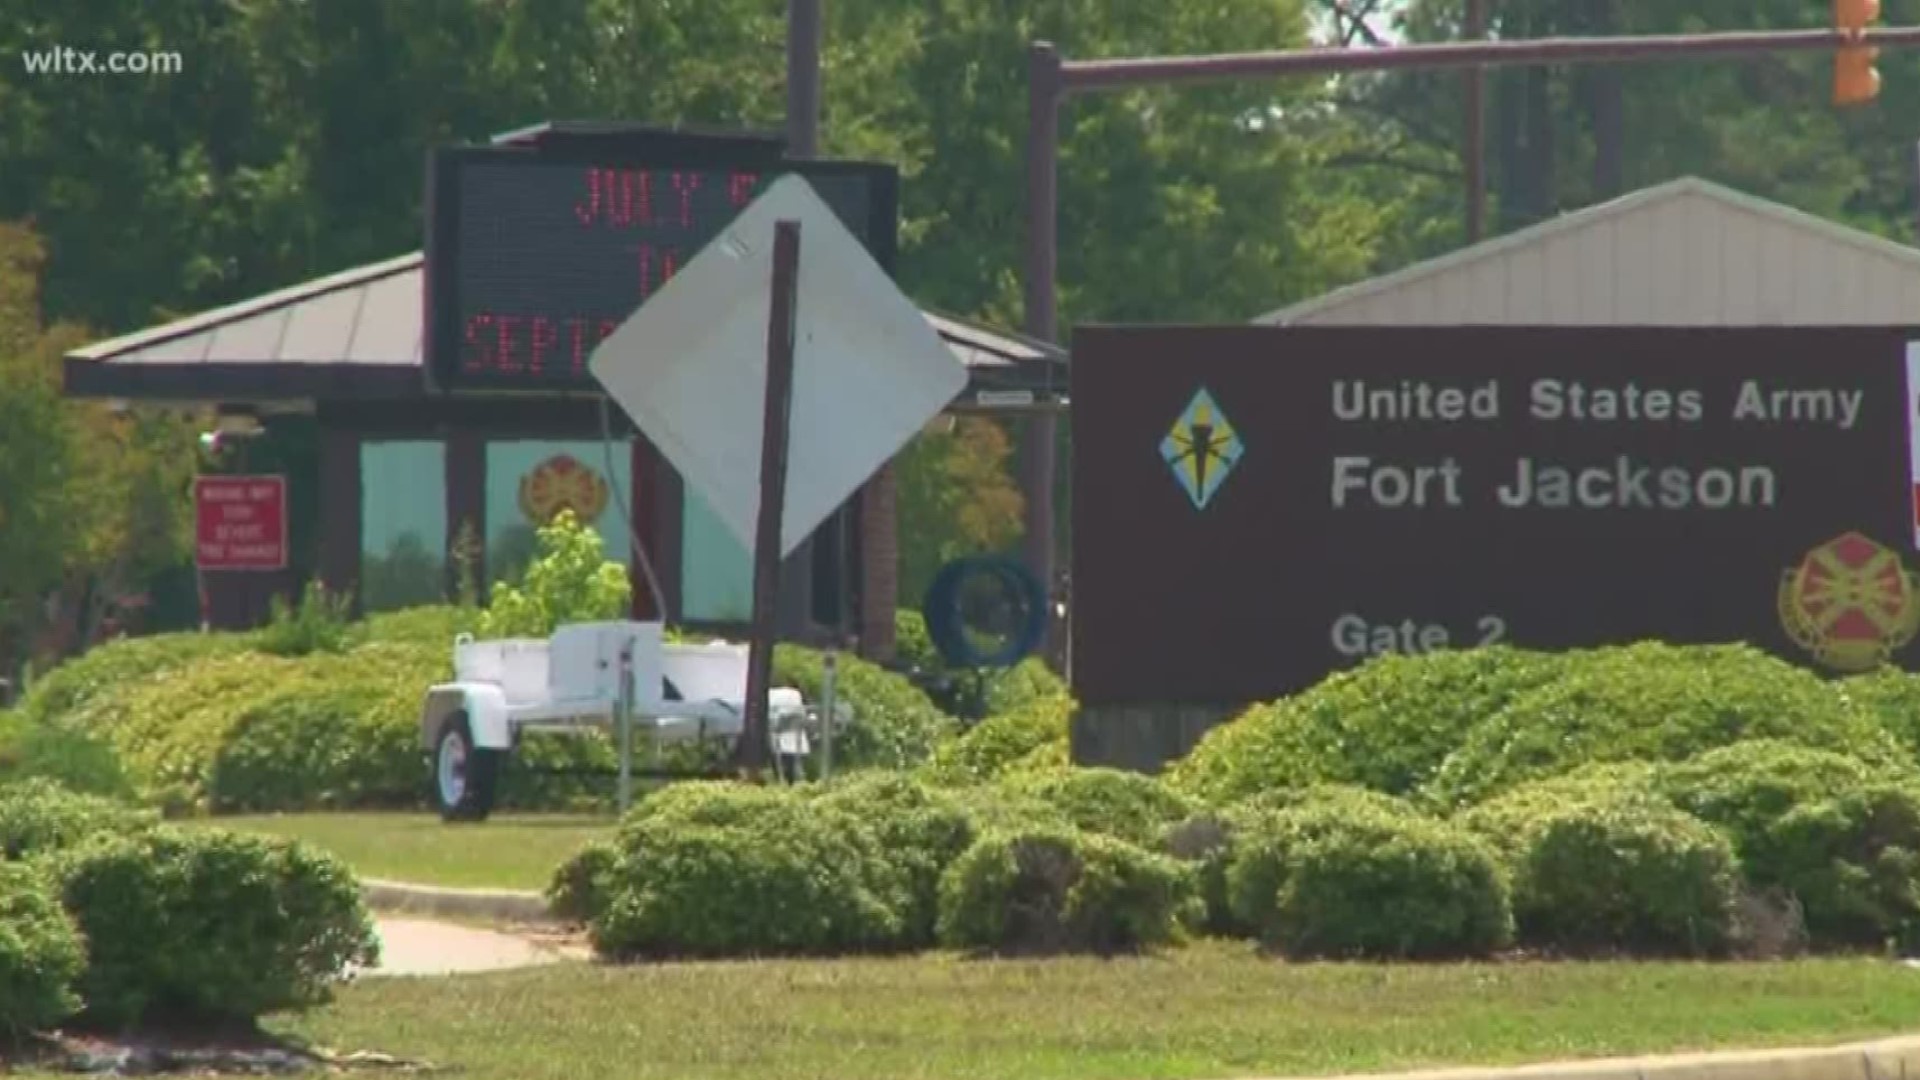 An 18-year-old Soldier-in-Training died Friday while preparing to do physical training in his battalion area at Fort Jackson.